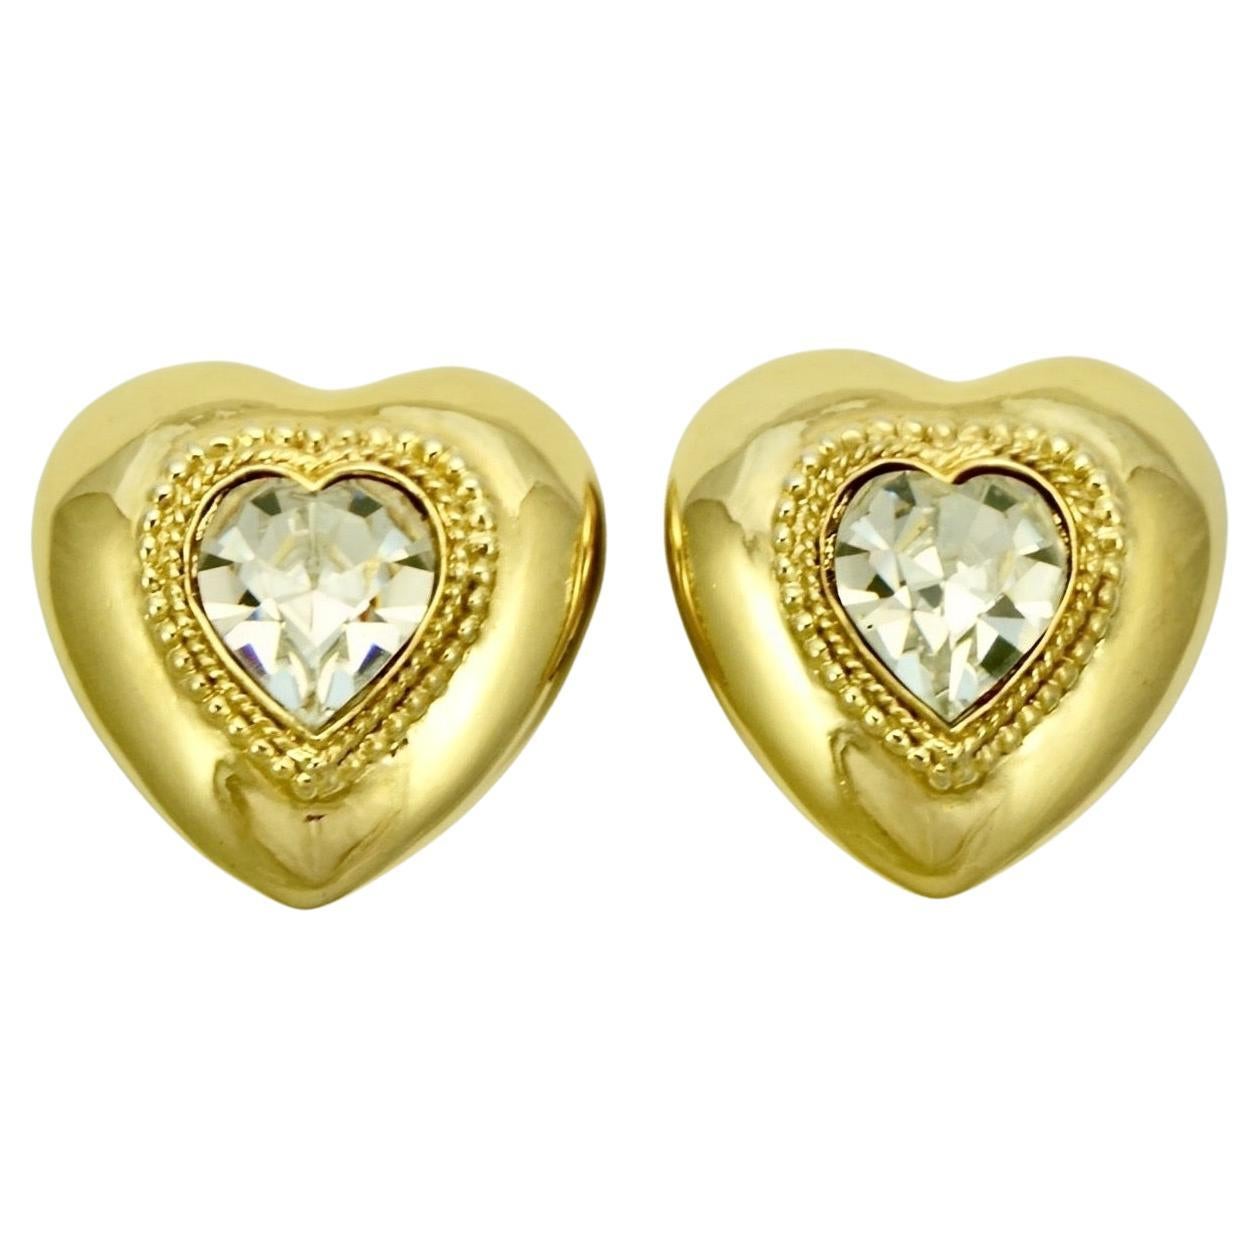 Butler & Wilson Large Gold Plated Heart Earrings with Clear Crystals circa 1980s For Sale